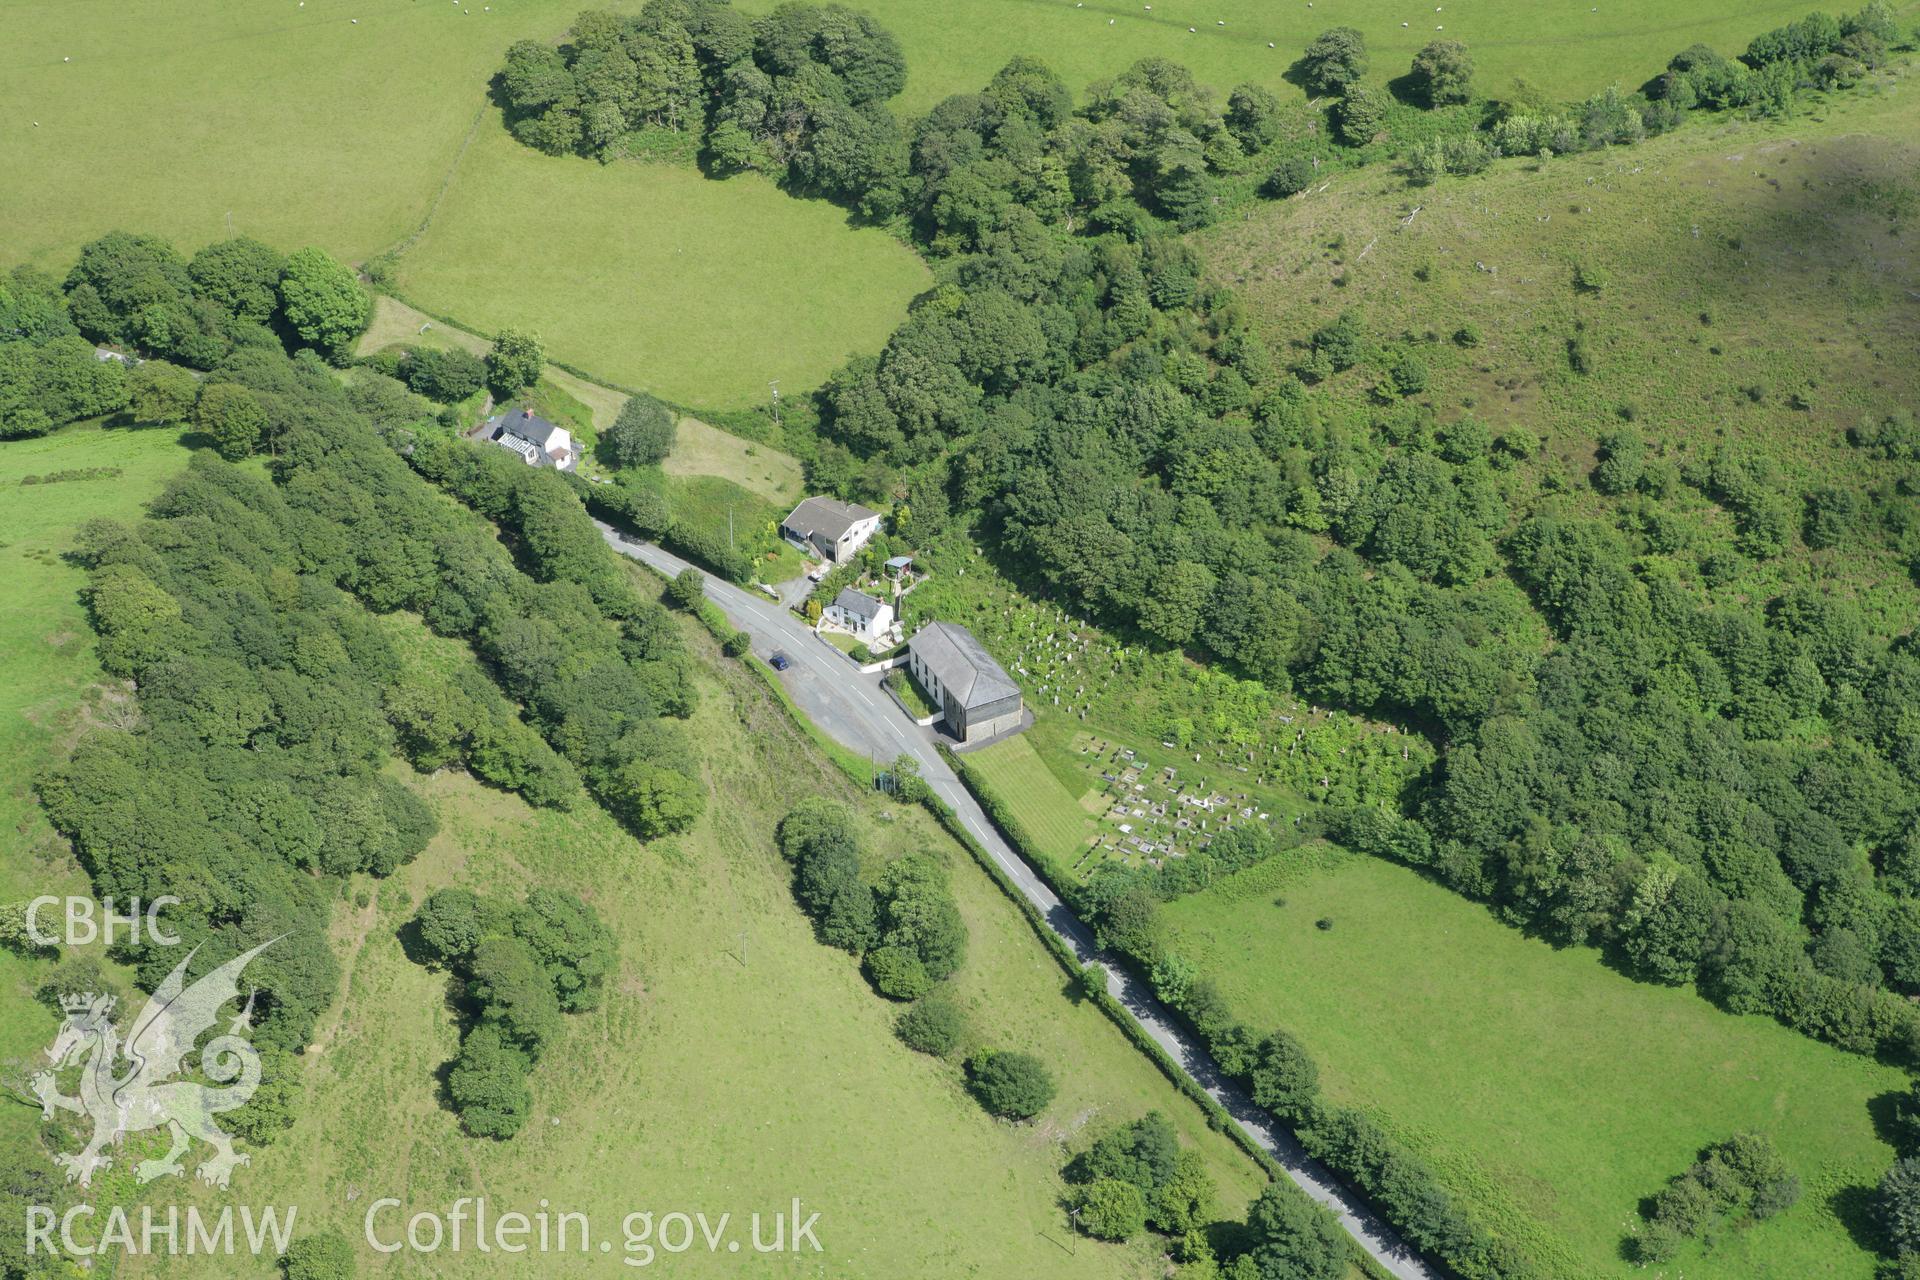 RCAHMW colour oblique aerial photograph of Troedrhiwdalar Independent Chapel. Taken on 09 July 2007 by Toby Driver